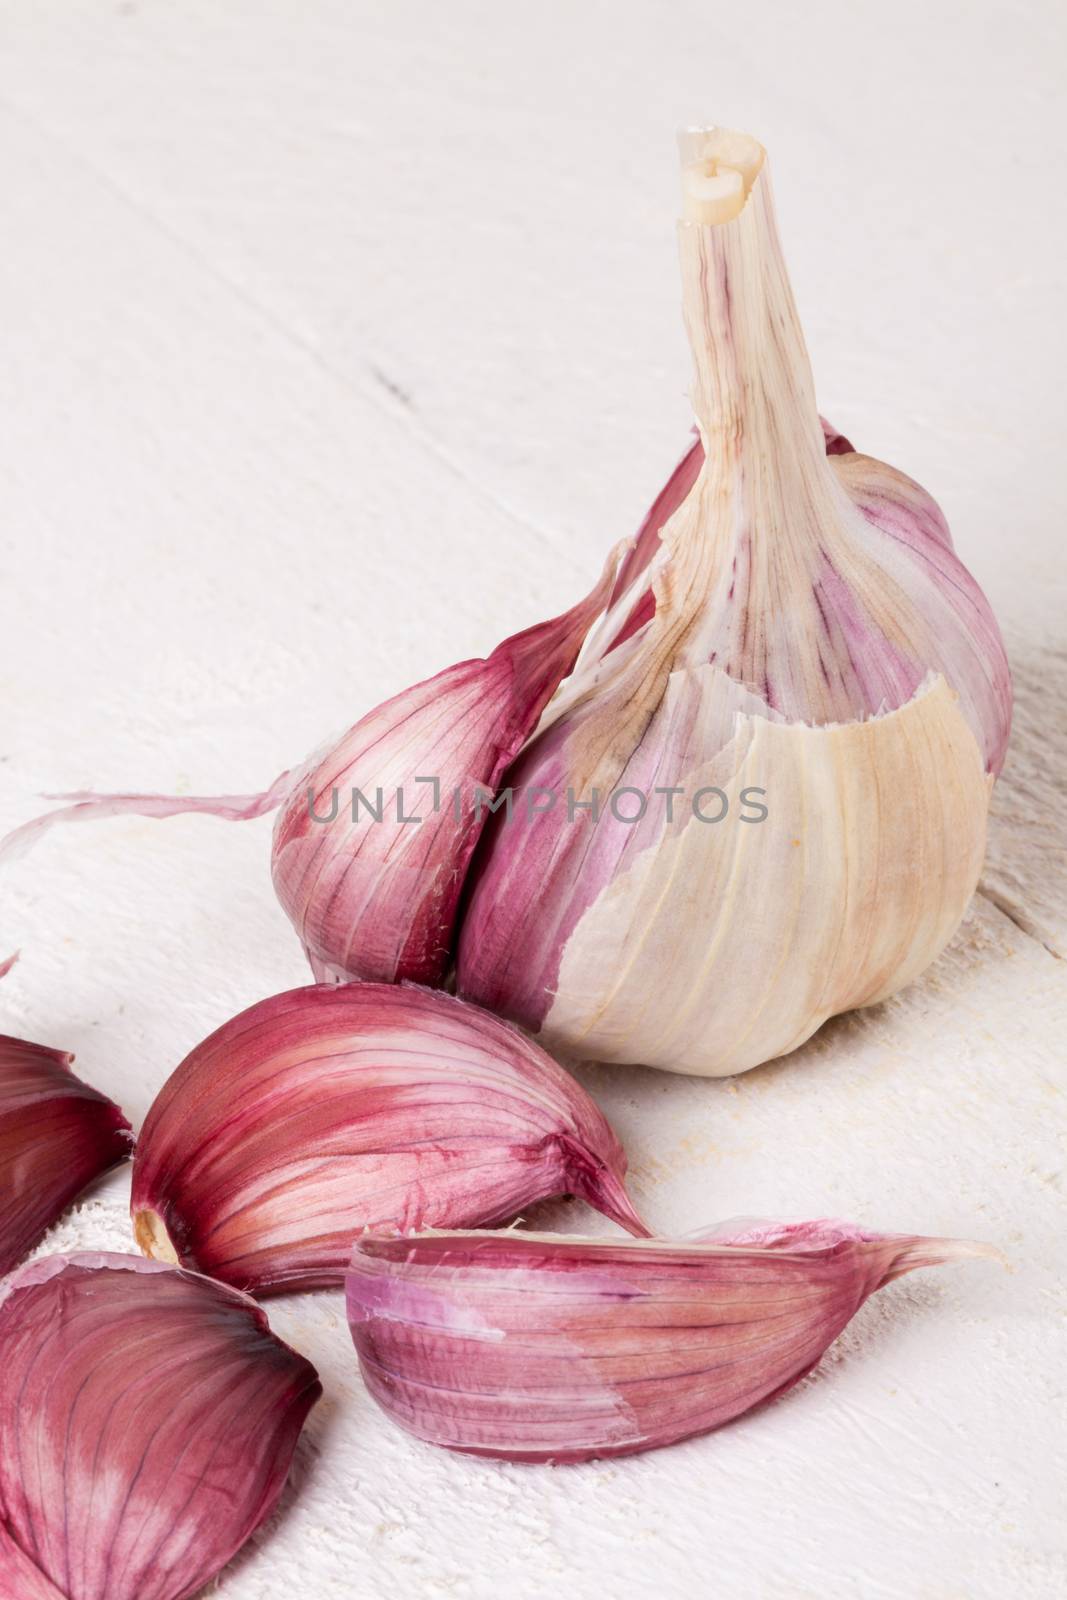 Fresh garlic bulb with loose cloves by juniart